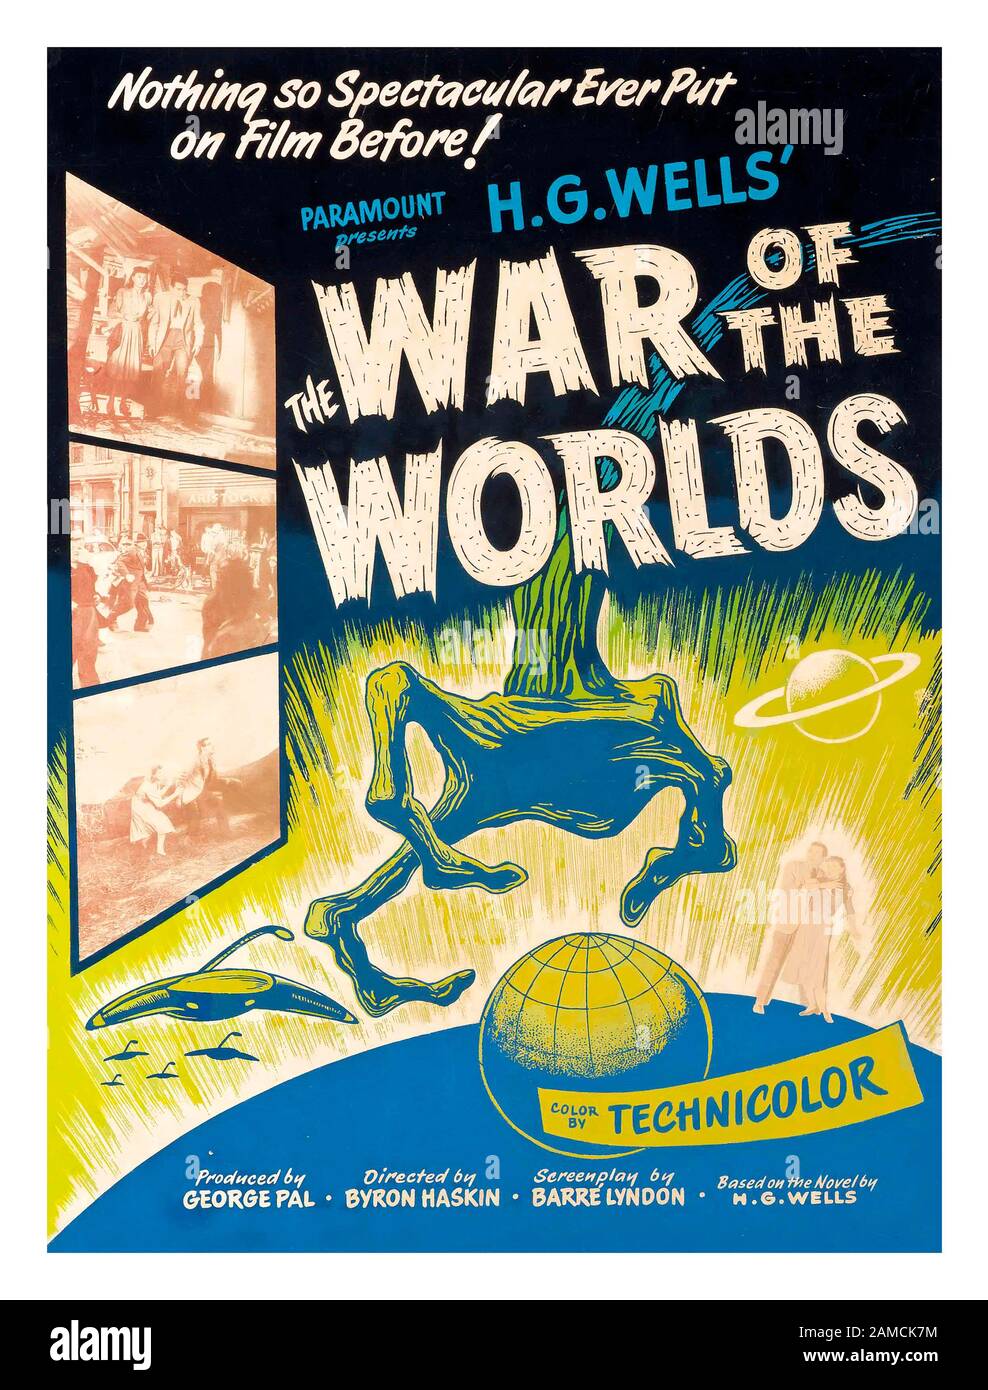 THE WAR OF THE WORLDS Vintage 1950’s Science Fiction Movie Film Poster by HG WELLS 1953, Paramount, U.S Stock Photo